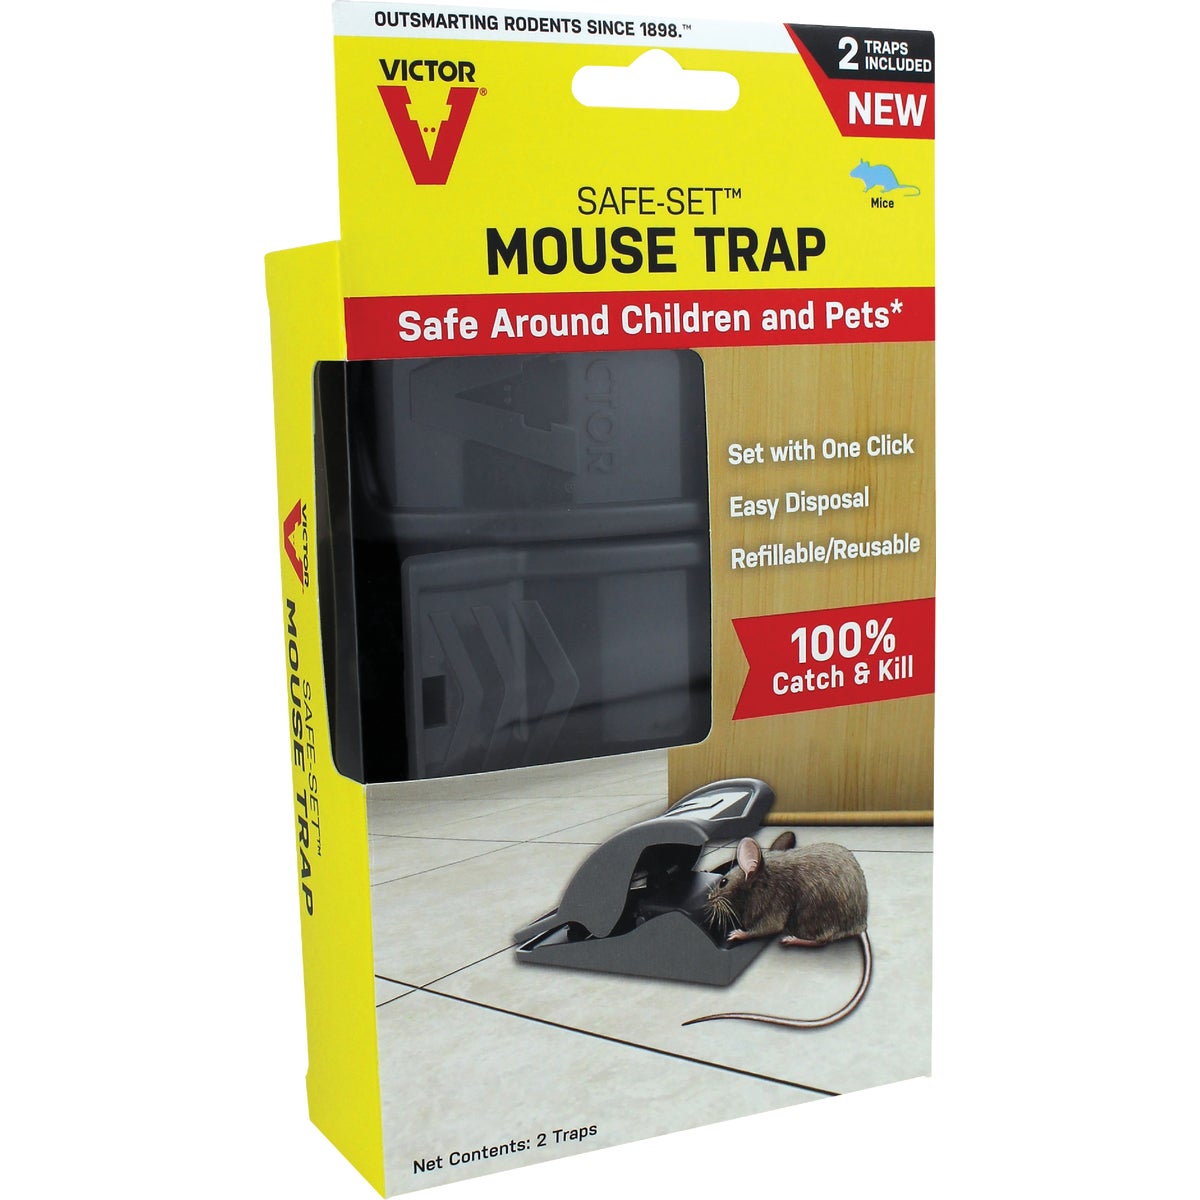 Item 700742, Victor Safe-Set Mouse Trap was engineered with safety in mind.